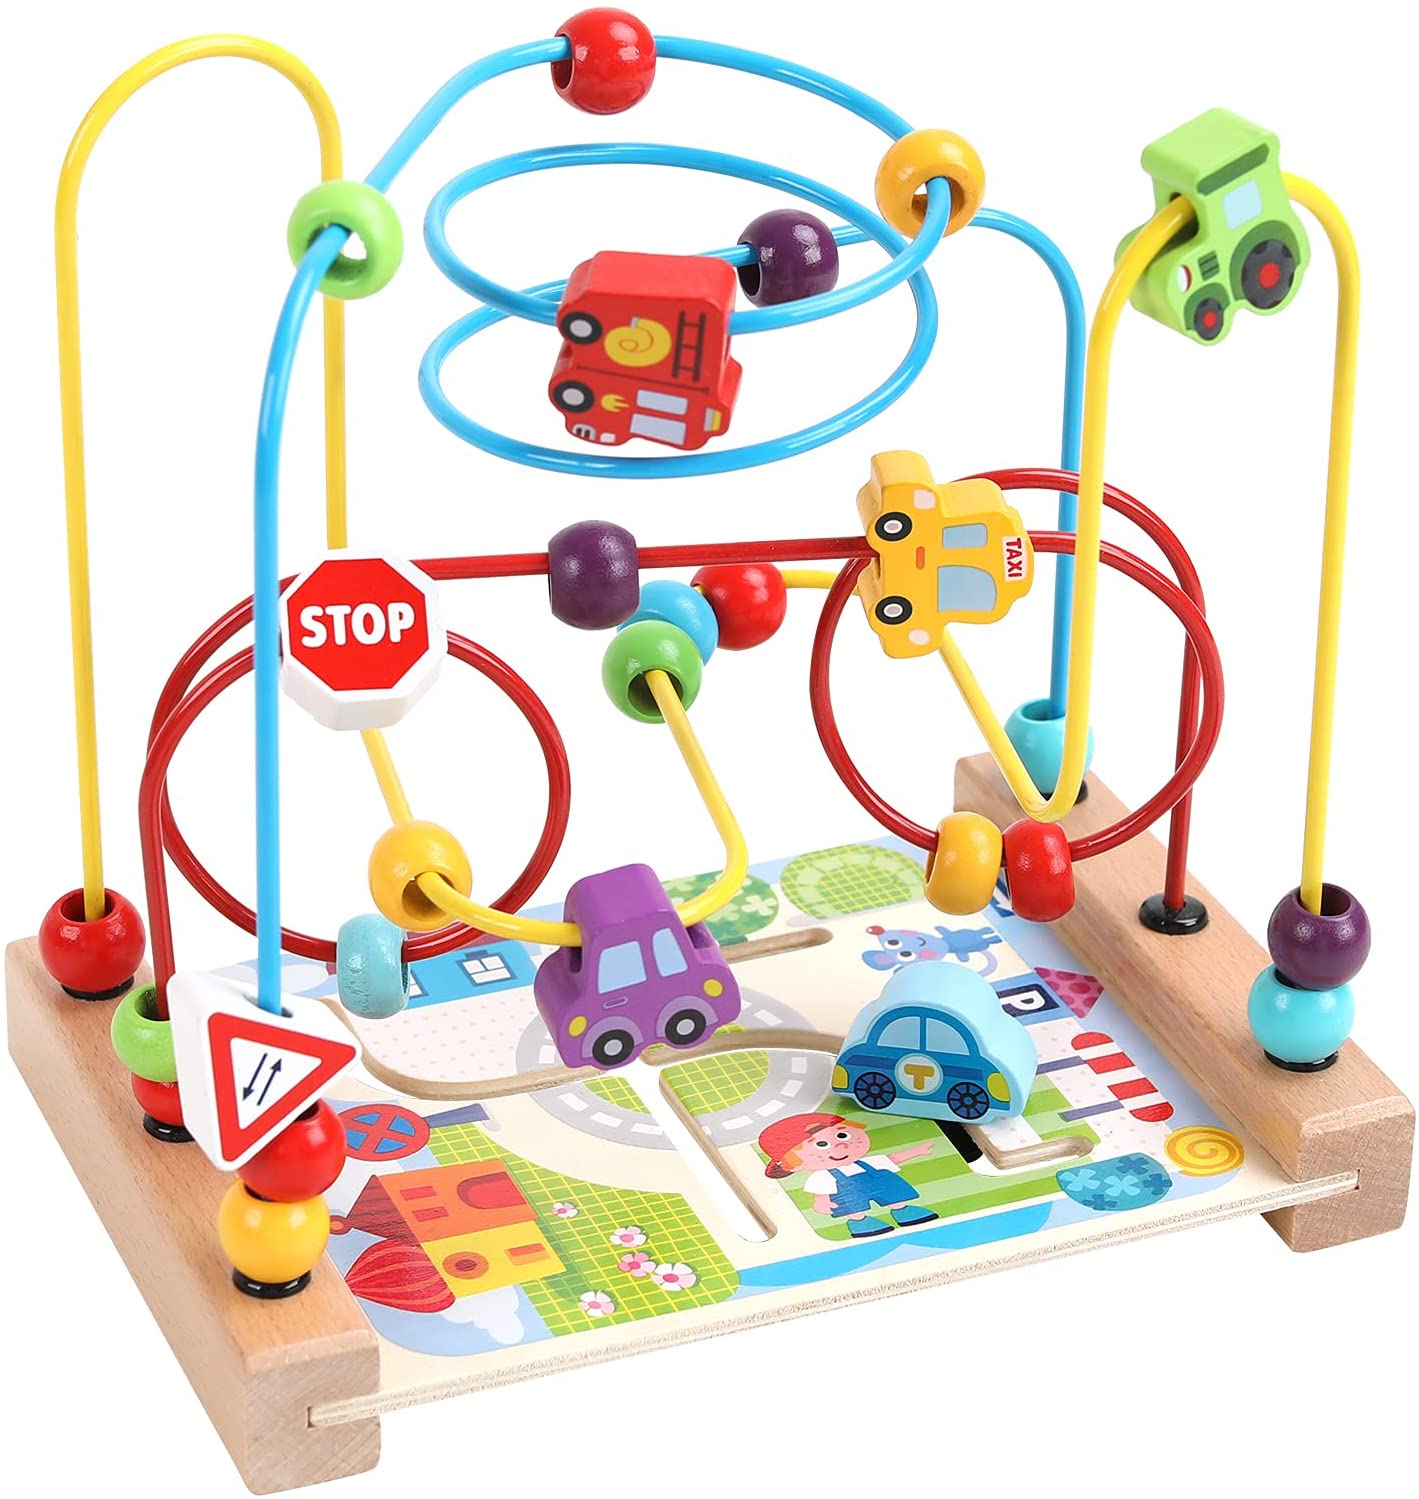 Wooden Toys Beads Maze Roller Coaster Educational Toys for Toddlers Baby Around Circle Bead Skill Improvement Wood Toys Birthday Gift for Boys & Girls